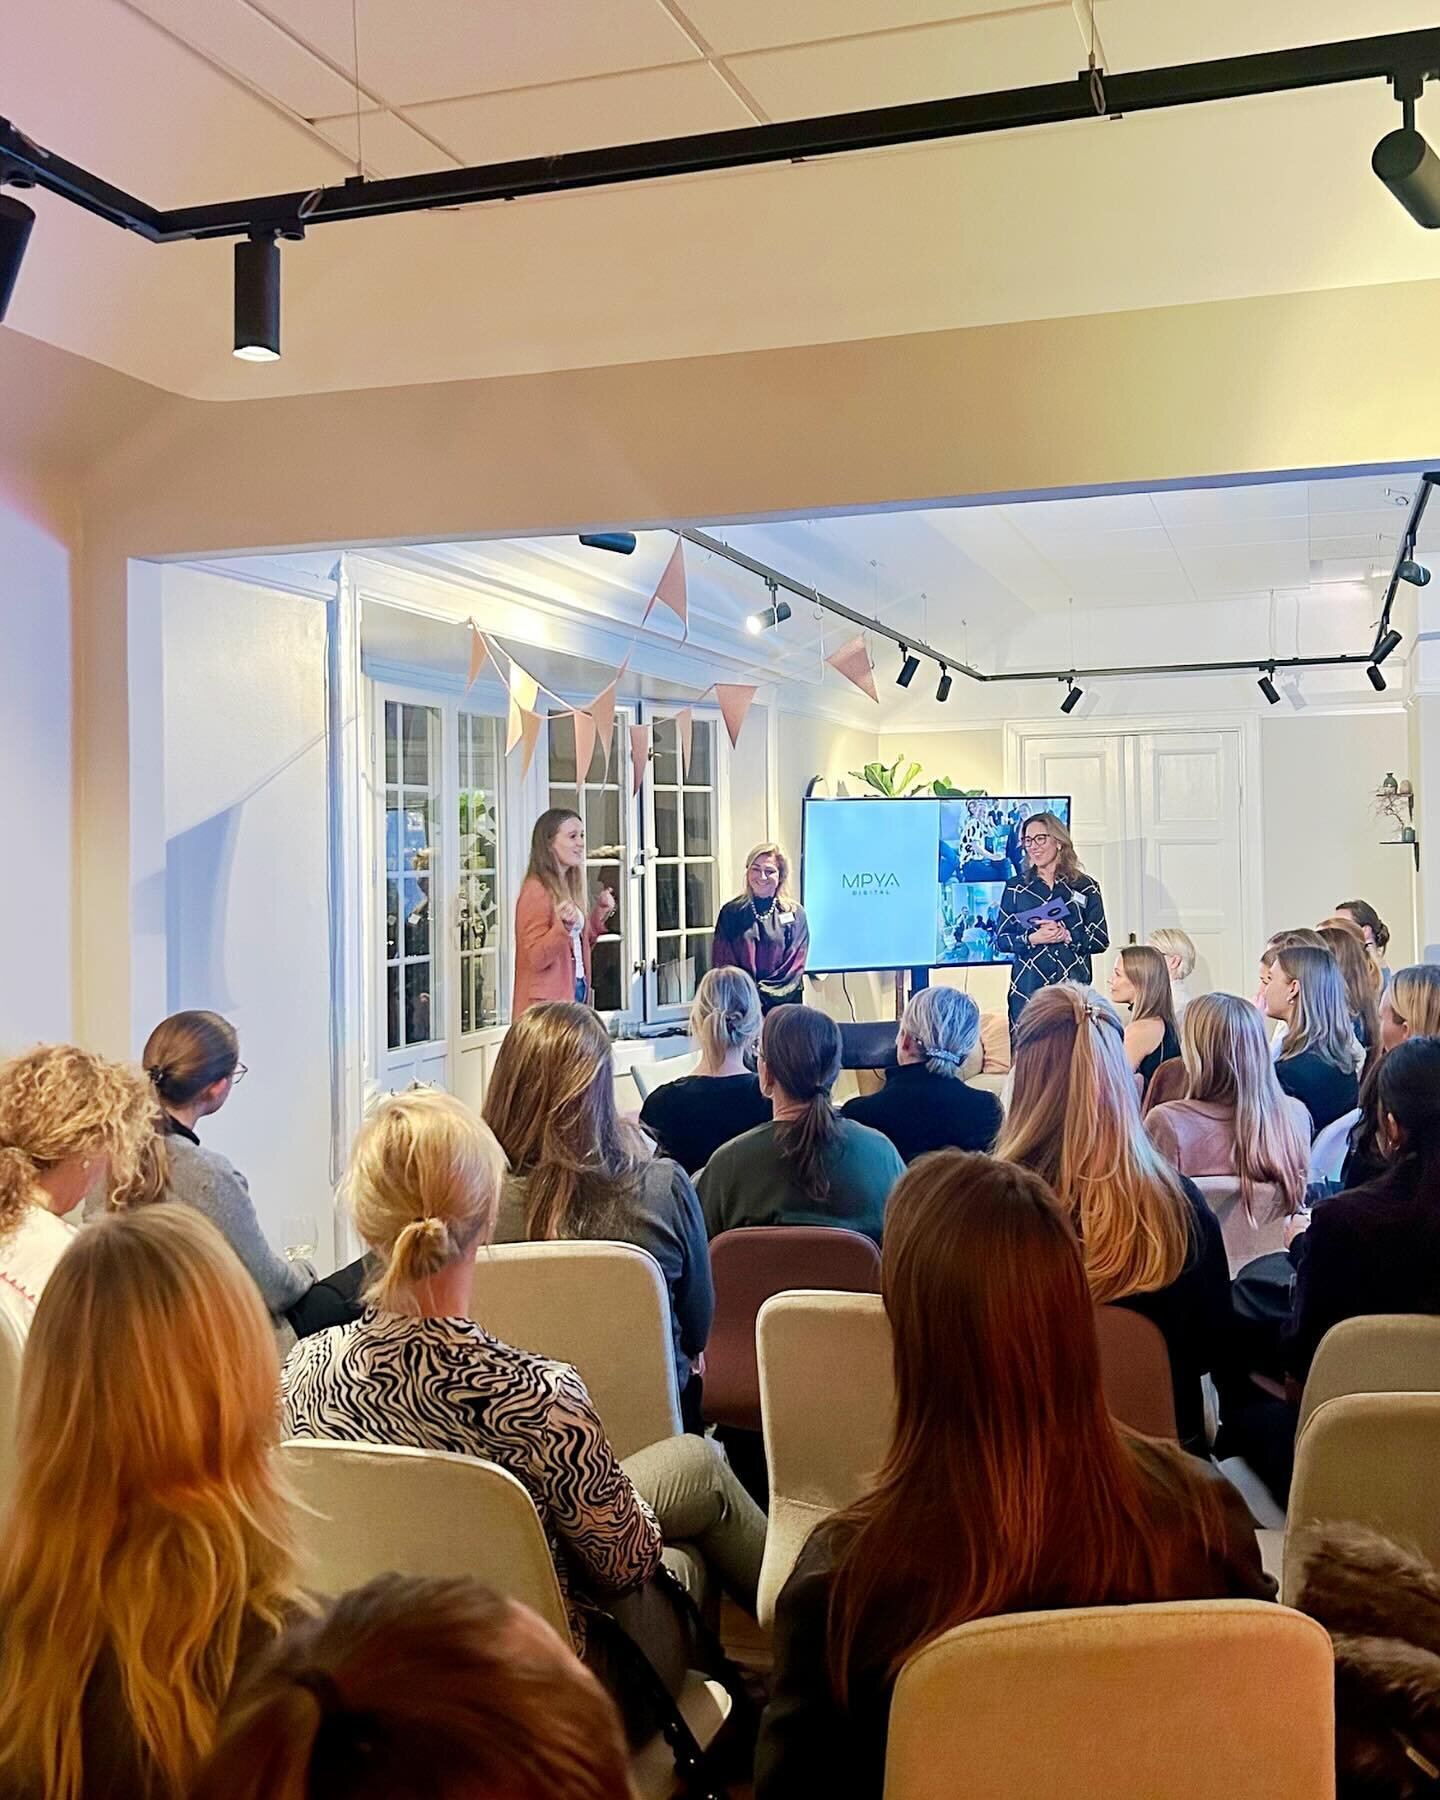 Last week, we were honored to host the Women for Leaders network&rsquo;s event at our office. 🤩

It was a great joy to engage in exciting discussions about the future &rdquo;optimal&rdquo; organization and ways to spark passion and engagement at the